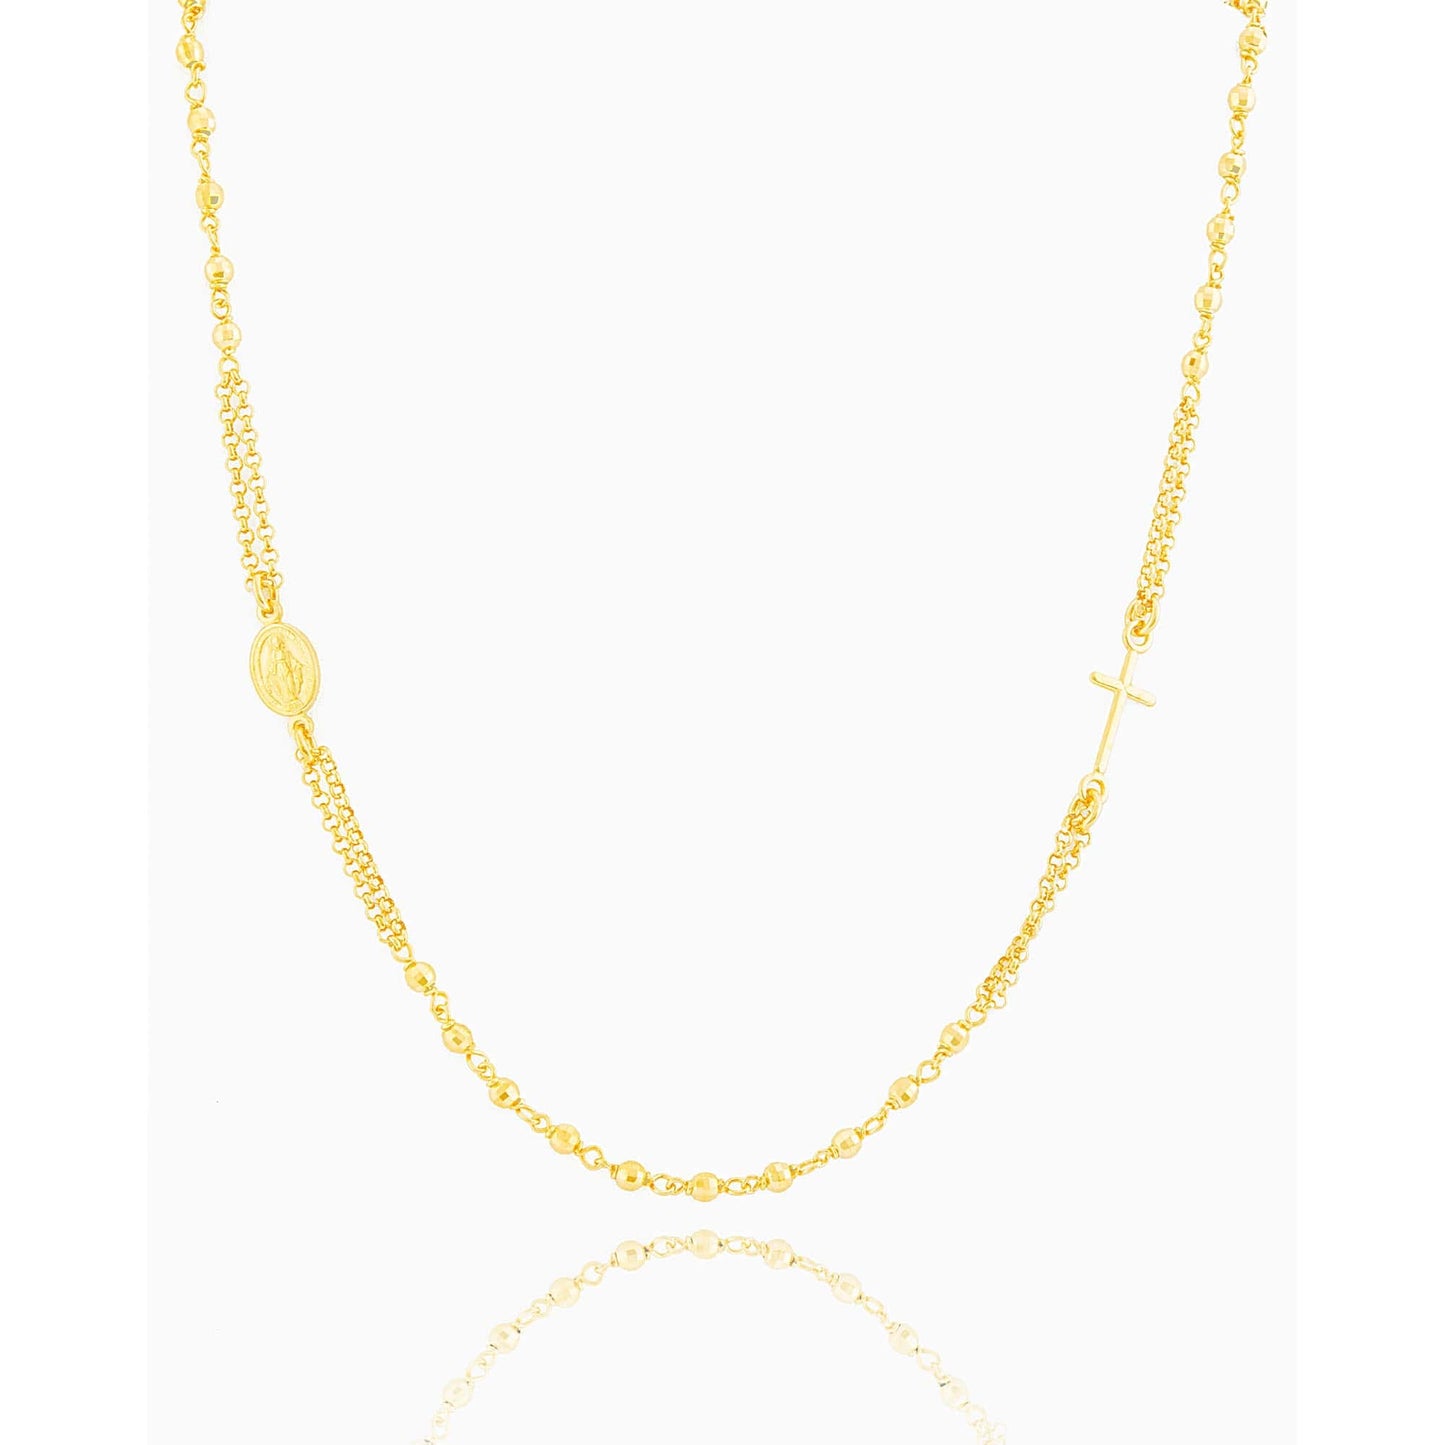 MONDO CATTOLICO Necklaces Gold / Cm 46 (18.1 in) STERLING SILVER PLATED 3 MM BEADS NECKLACE